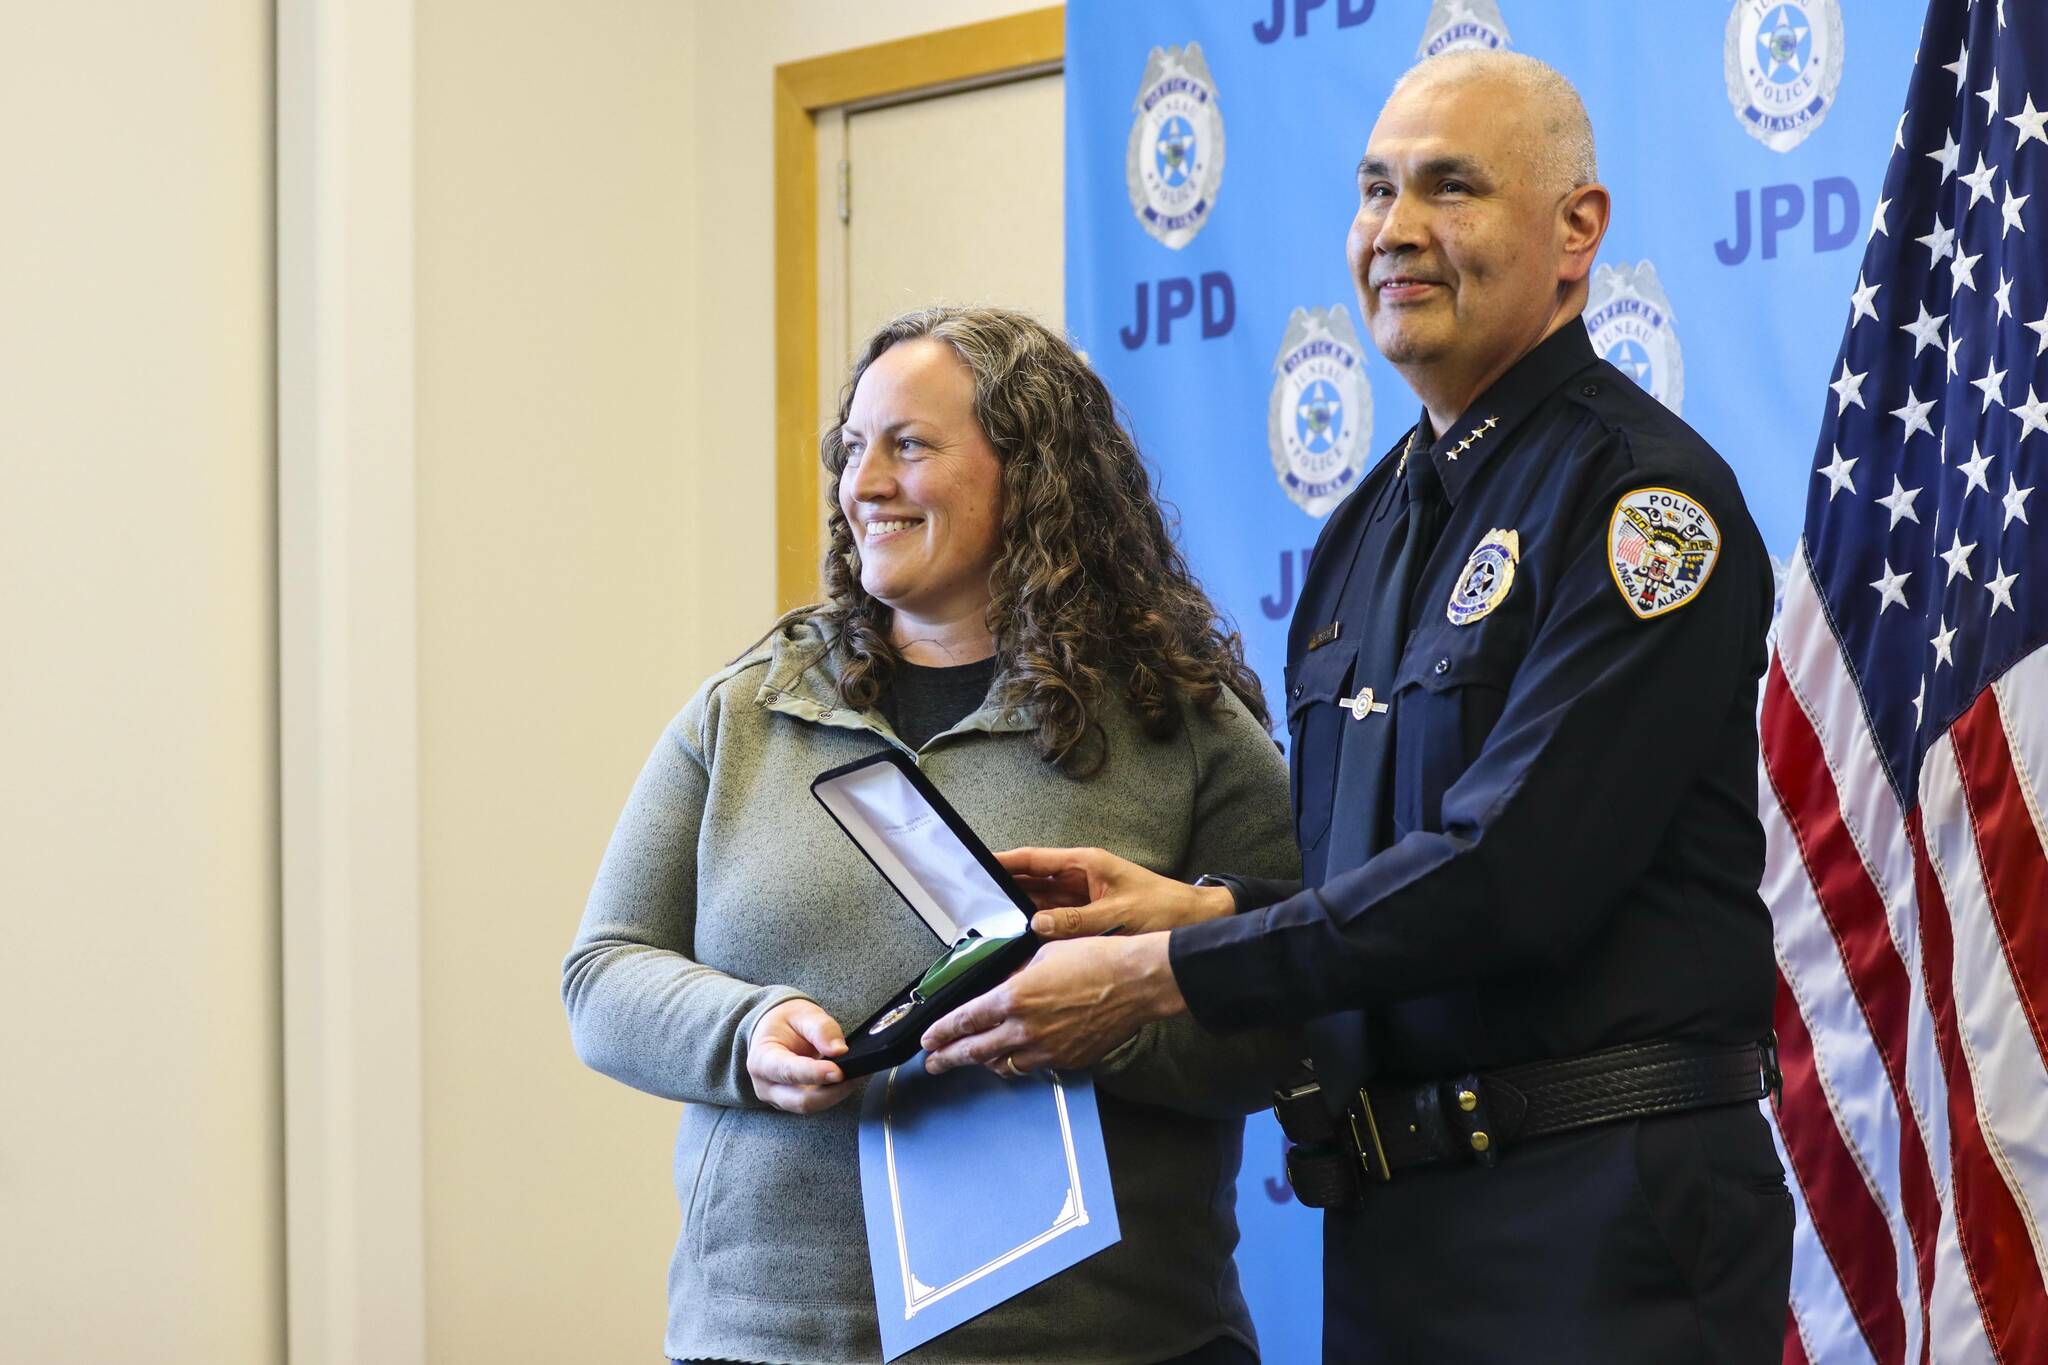 Michael S. Lockett / Juneau Empire 
Chief Ed Mercer presents community service officer Sarah Dolan with the Jackie Renninger Community Policing Award during the Juneau Police Department’s annual award ceremony on June 9, 2022.